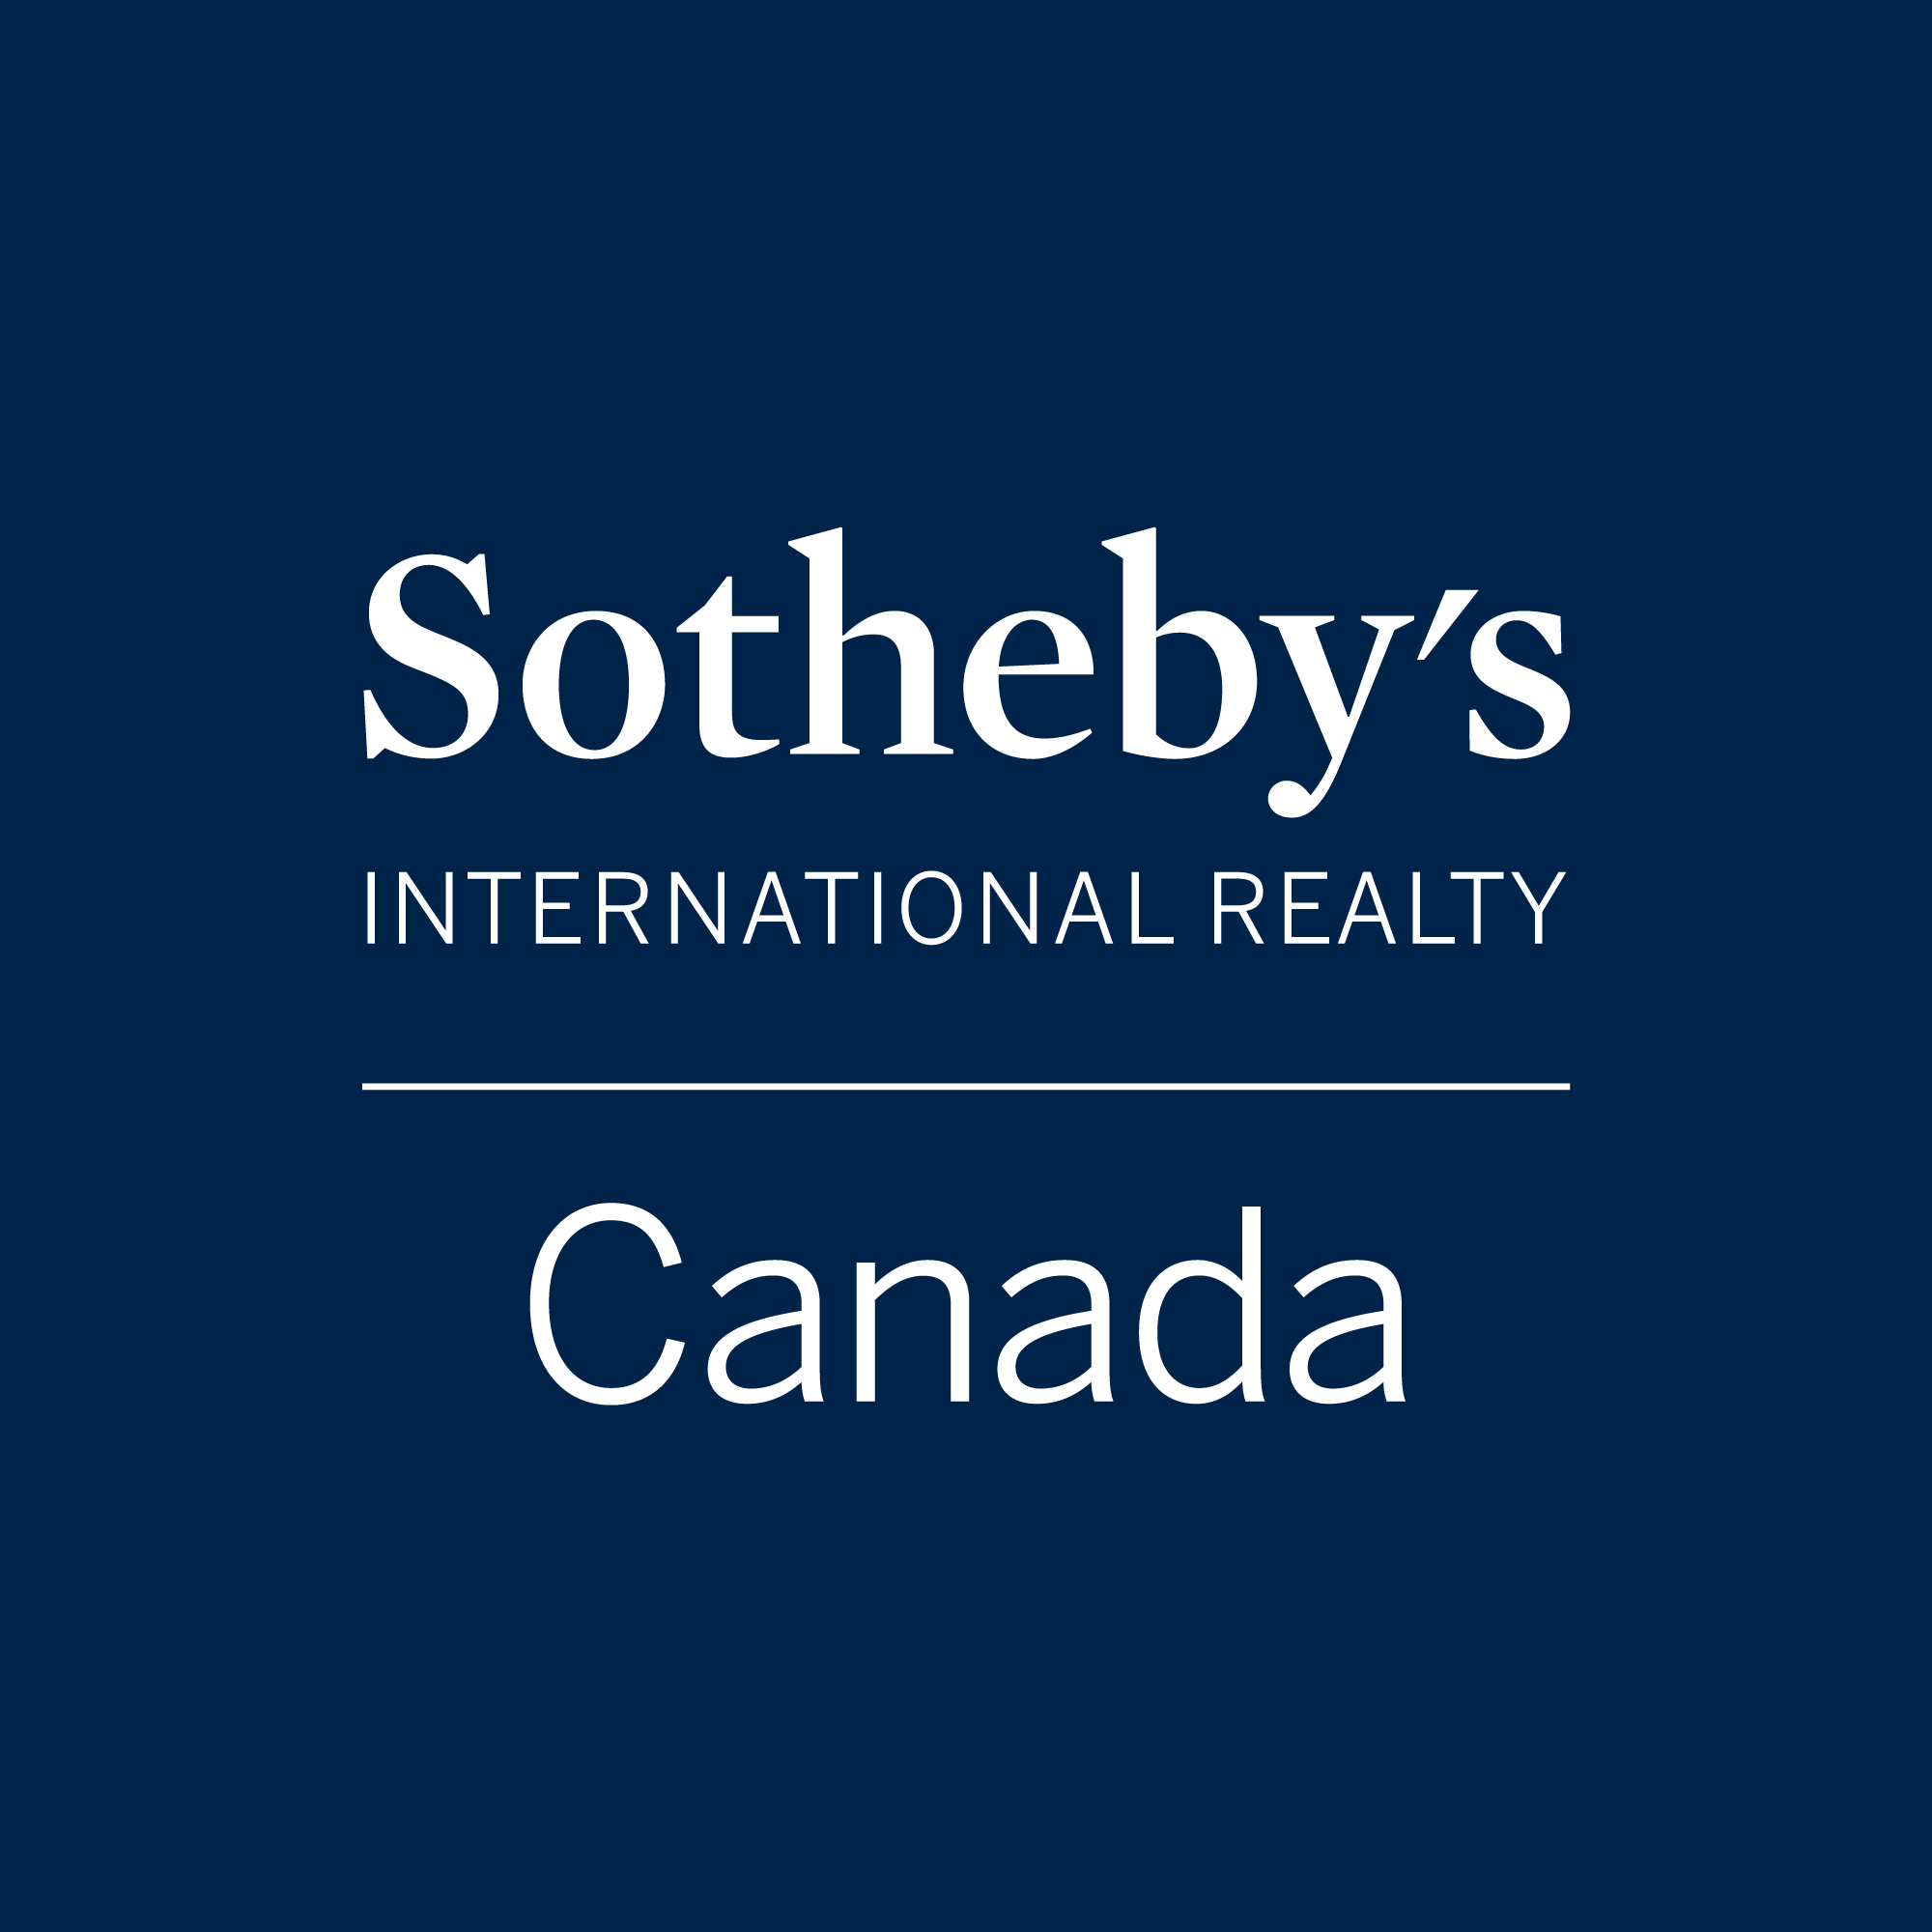 Sotheby's International Realty Canada - Real Estate Agents & Brokers